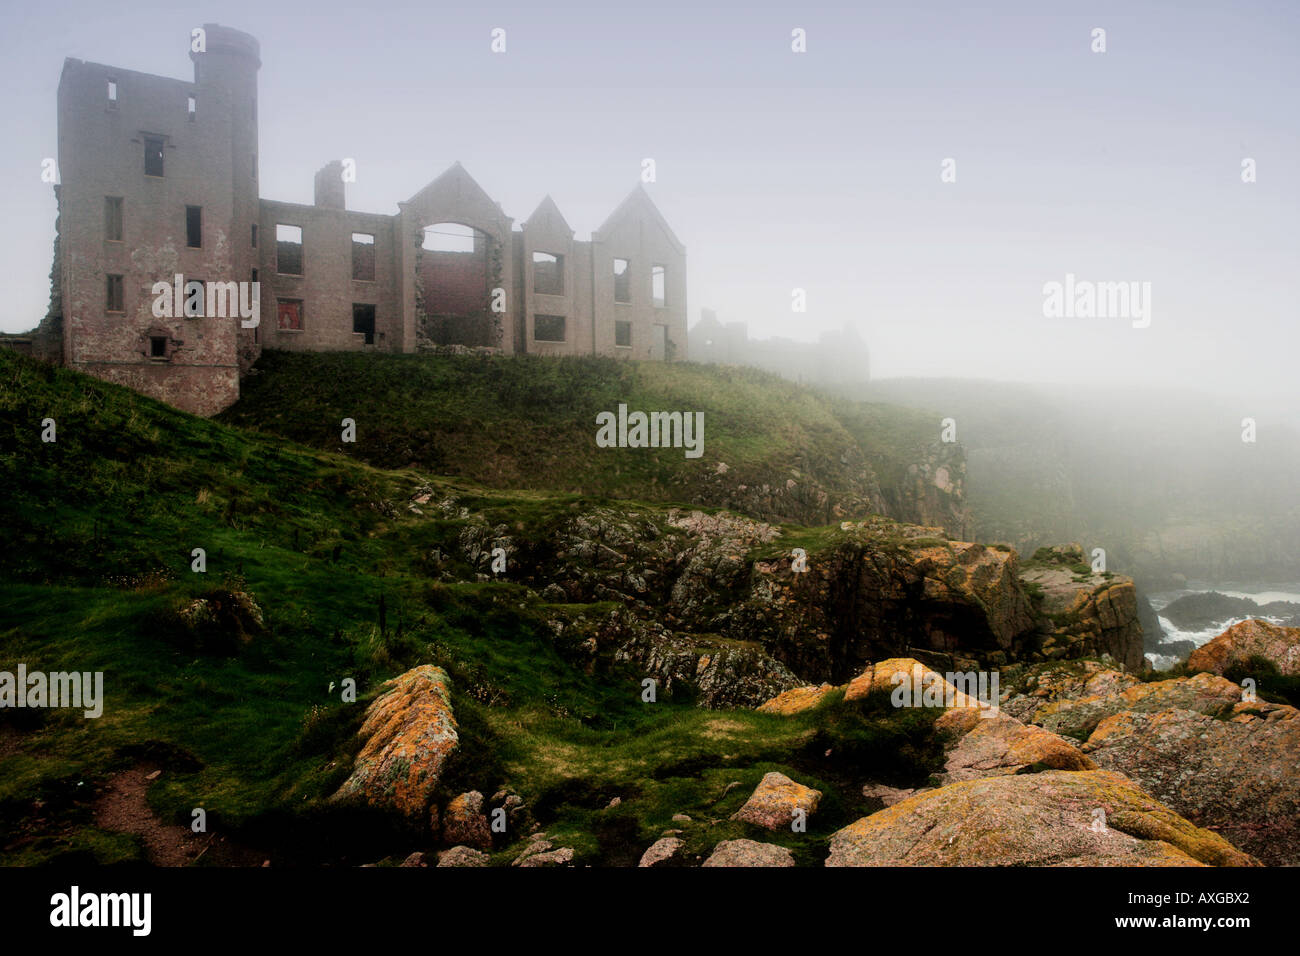 Moody Slains Castle north of aberdeen, scotland on a misty autumn day with steep cliffs and moody seas in foreground Stock Photo